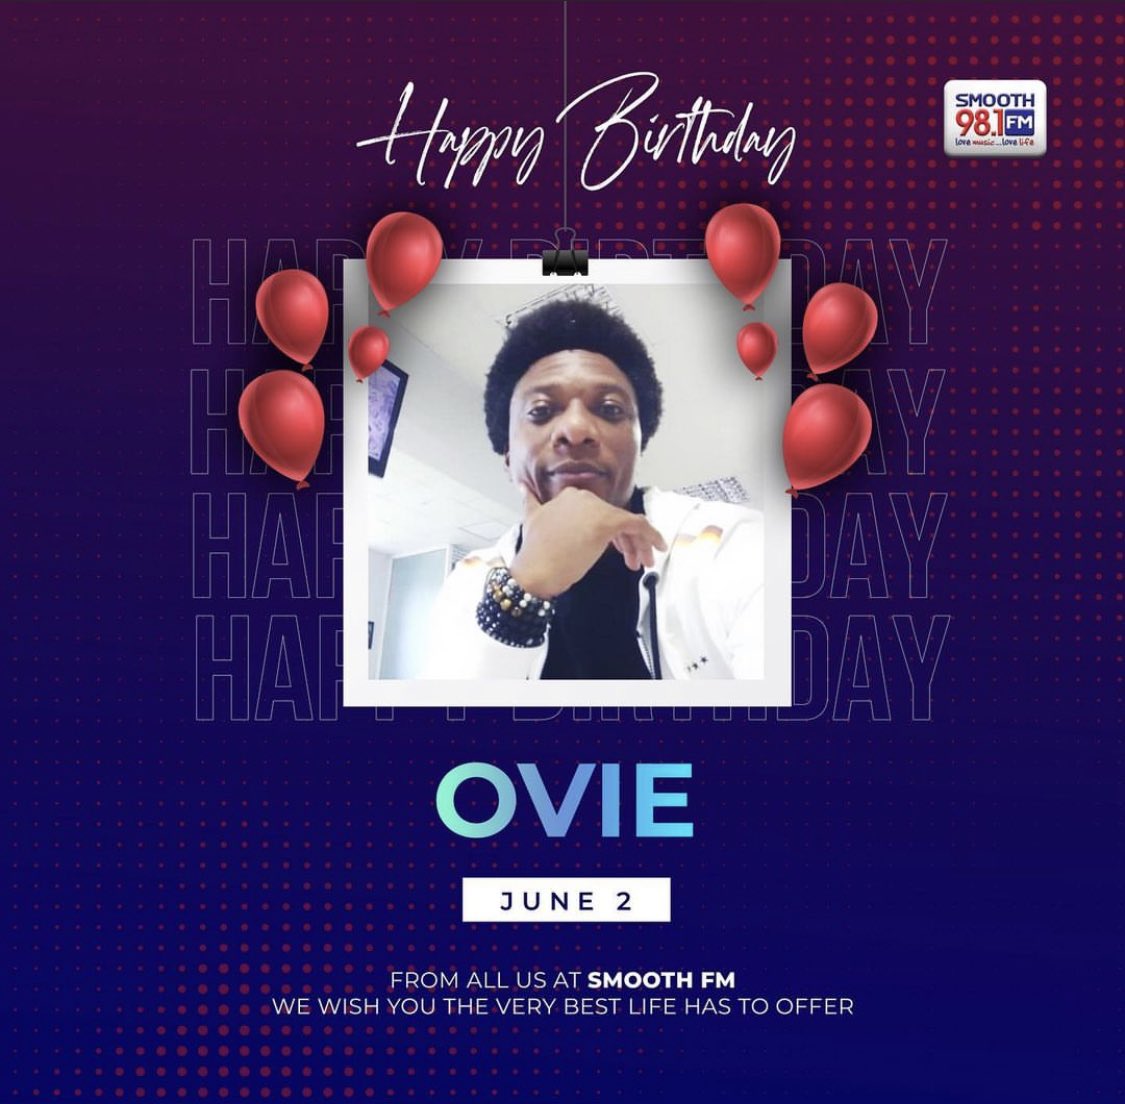 Today, we celebrate with Ovie
@audiocraftinc 

Happy Birthday! 🥳 

Please share your sweet wishes below 

❤️💙🤍

#Smooth981FM #SmoothFMLagos
#HappyBirthday #LoveMusic #LoveLife #LoveMusicLoveLife #Music #Entertainment #Love